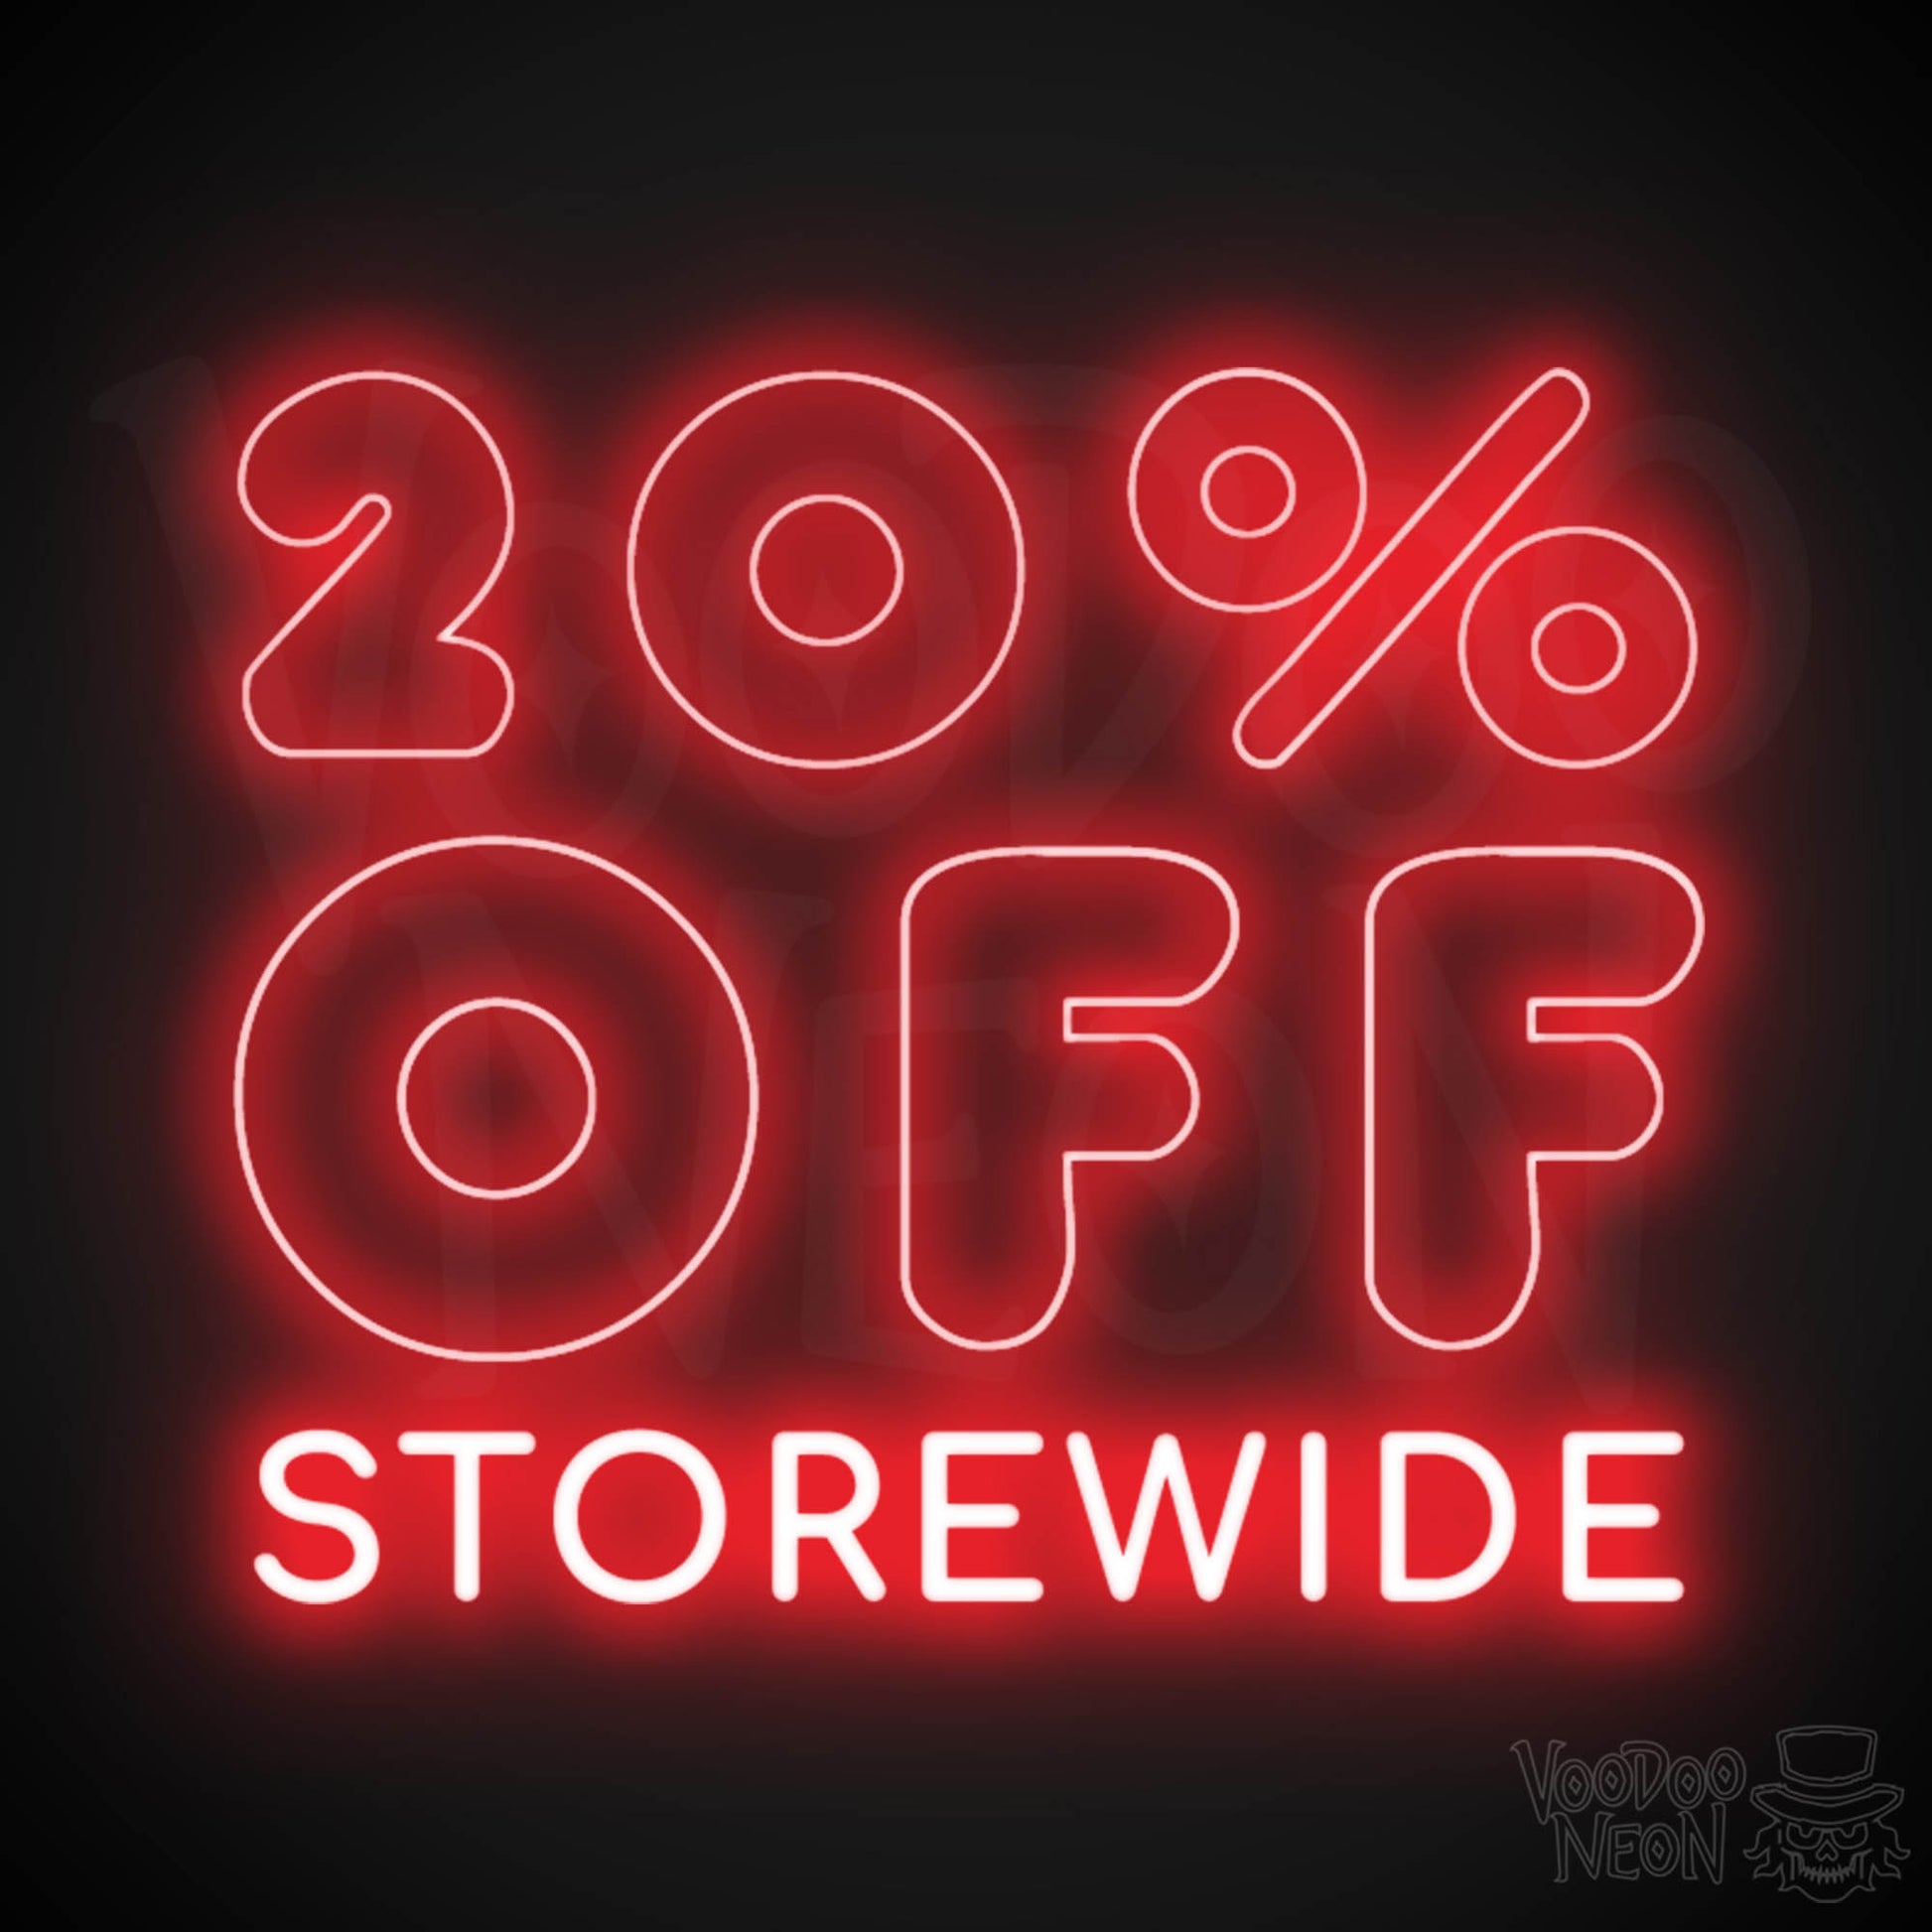 20% Off Storewide Neon Sign - 20% Off Storewide Sign - LED Shop Sign - Color Red